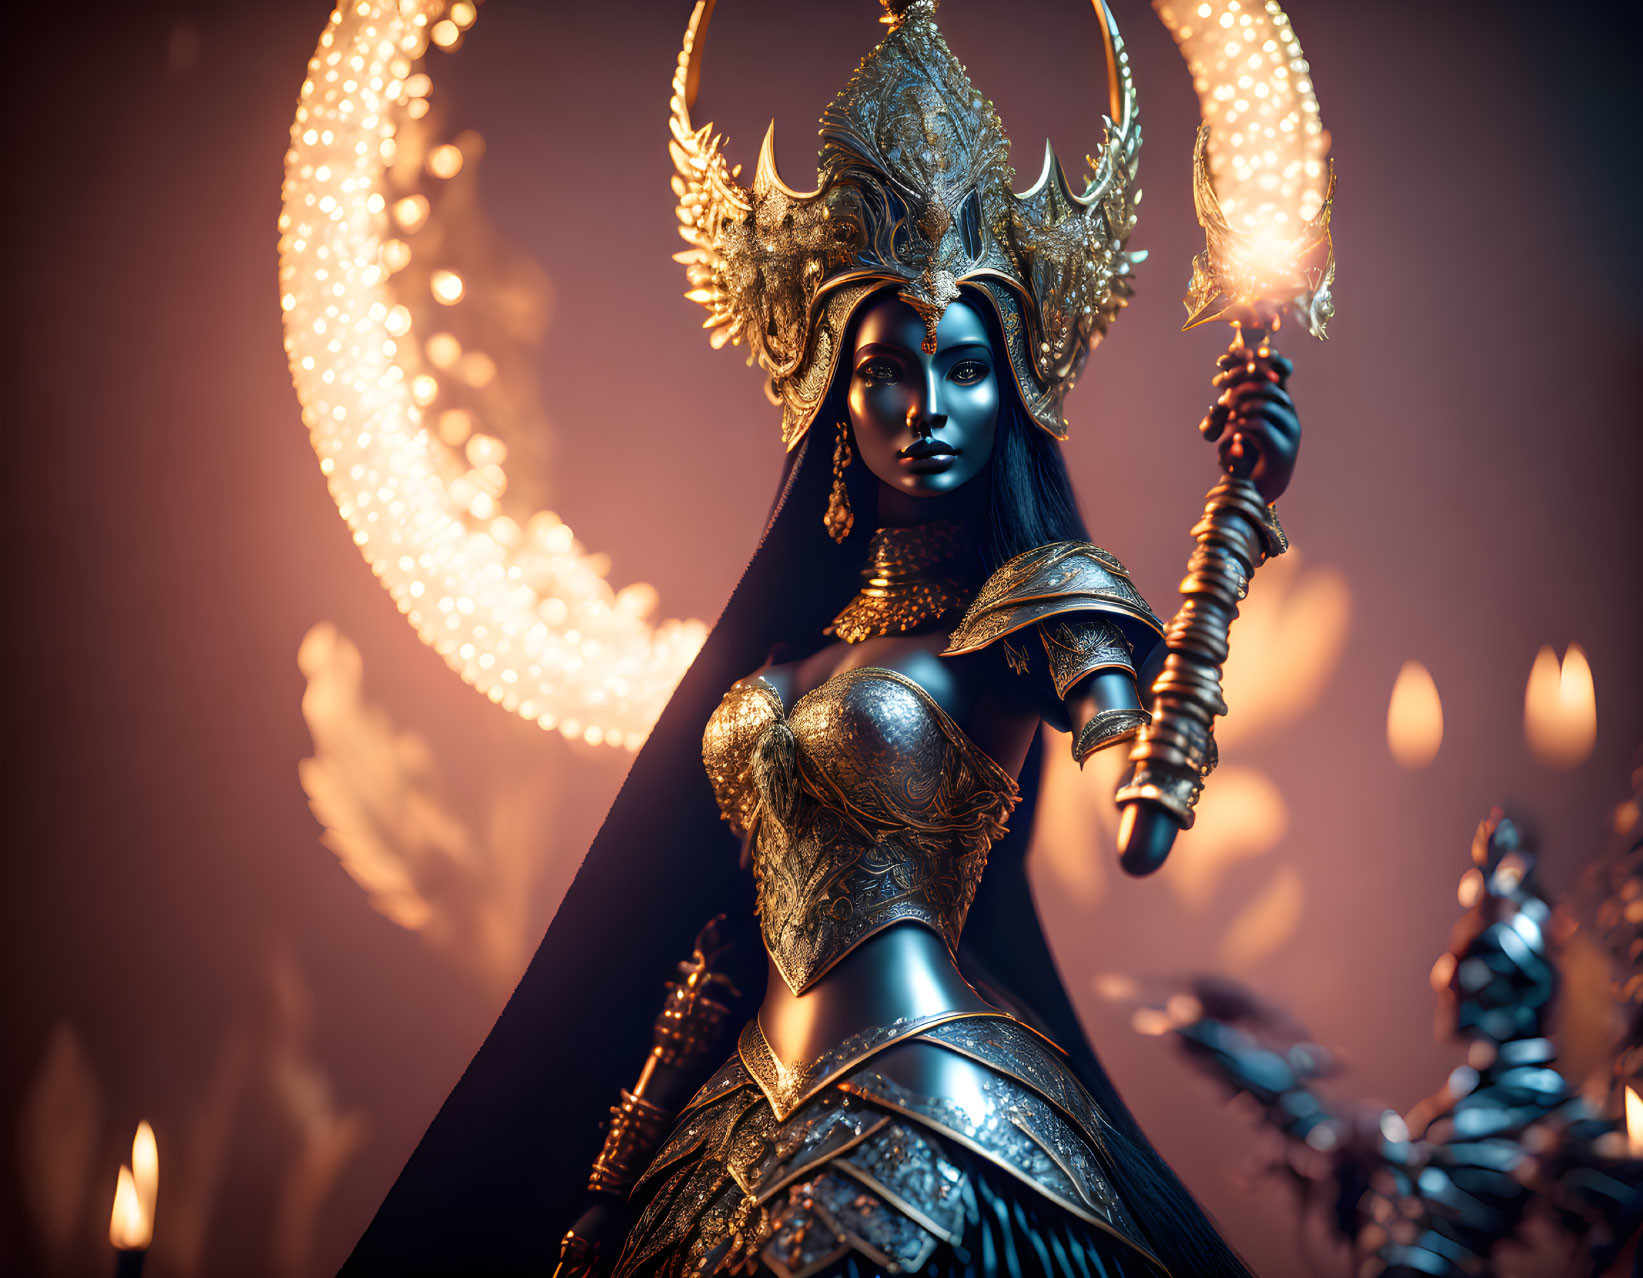 Fantasy queen with golden headgear and armor in regal pose.